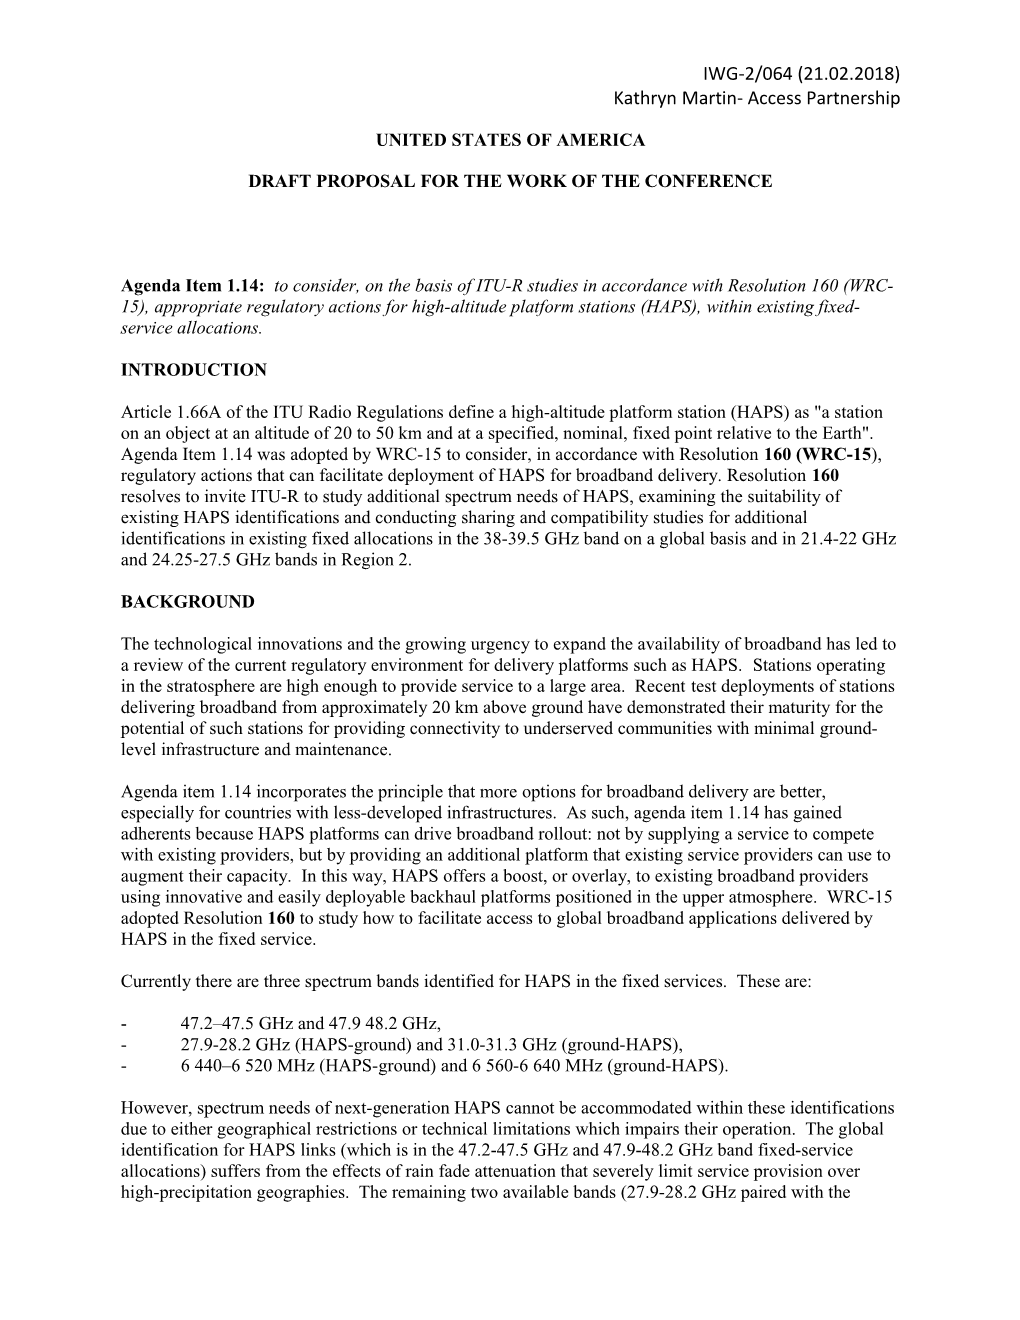 Draft Proposal for the Work of the Conference